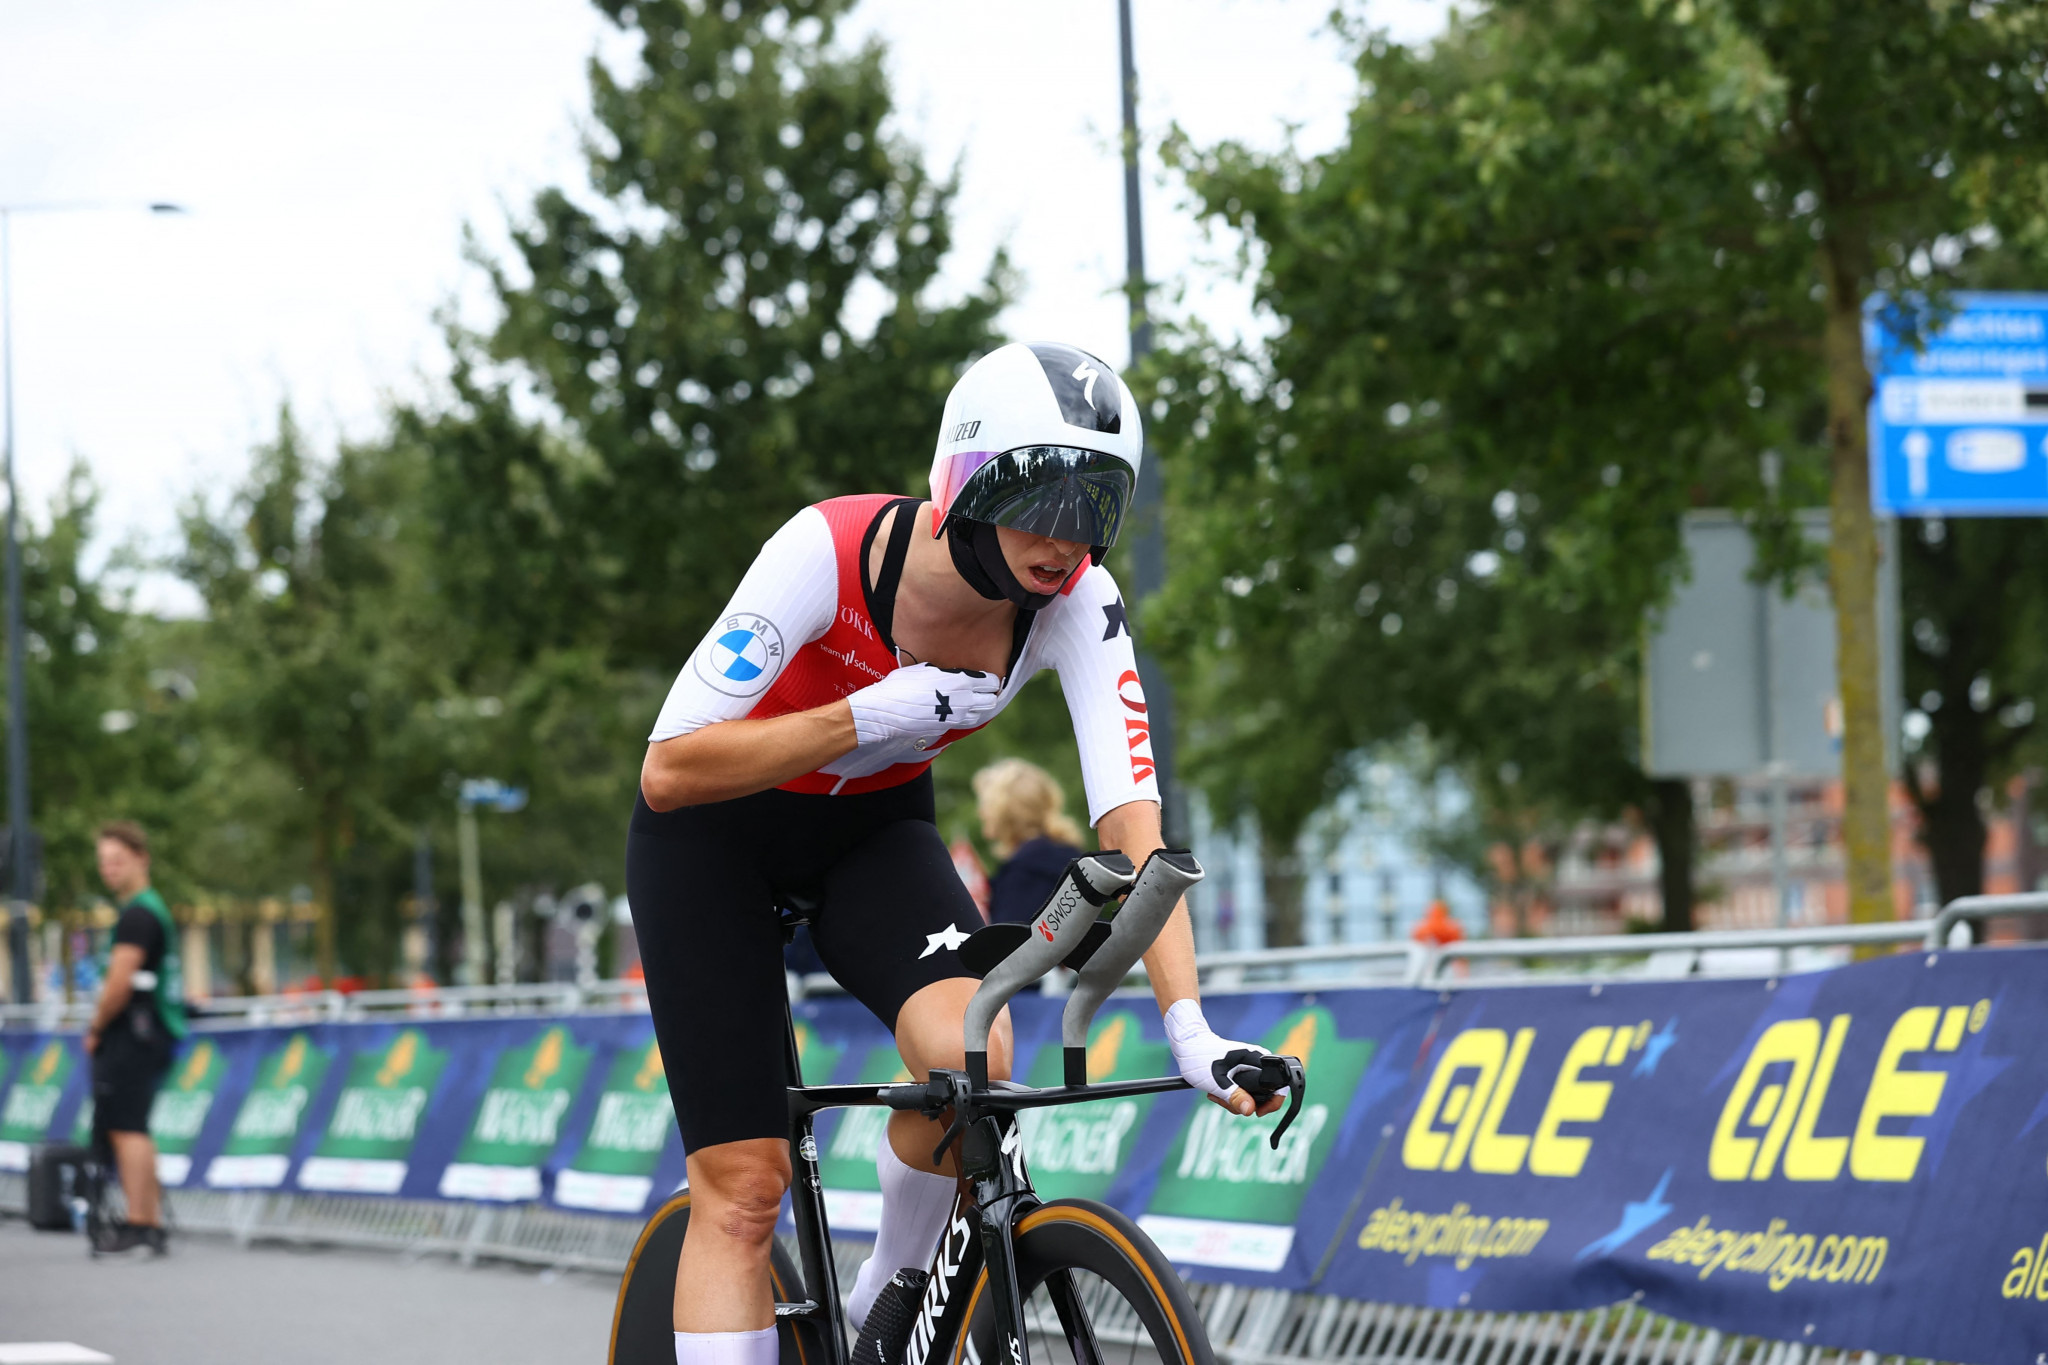 Switzerland's Marlen Reusser won the elite women's individual time trial for the third year running at the Road European Championships ©Getty Images